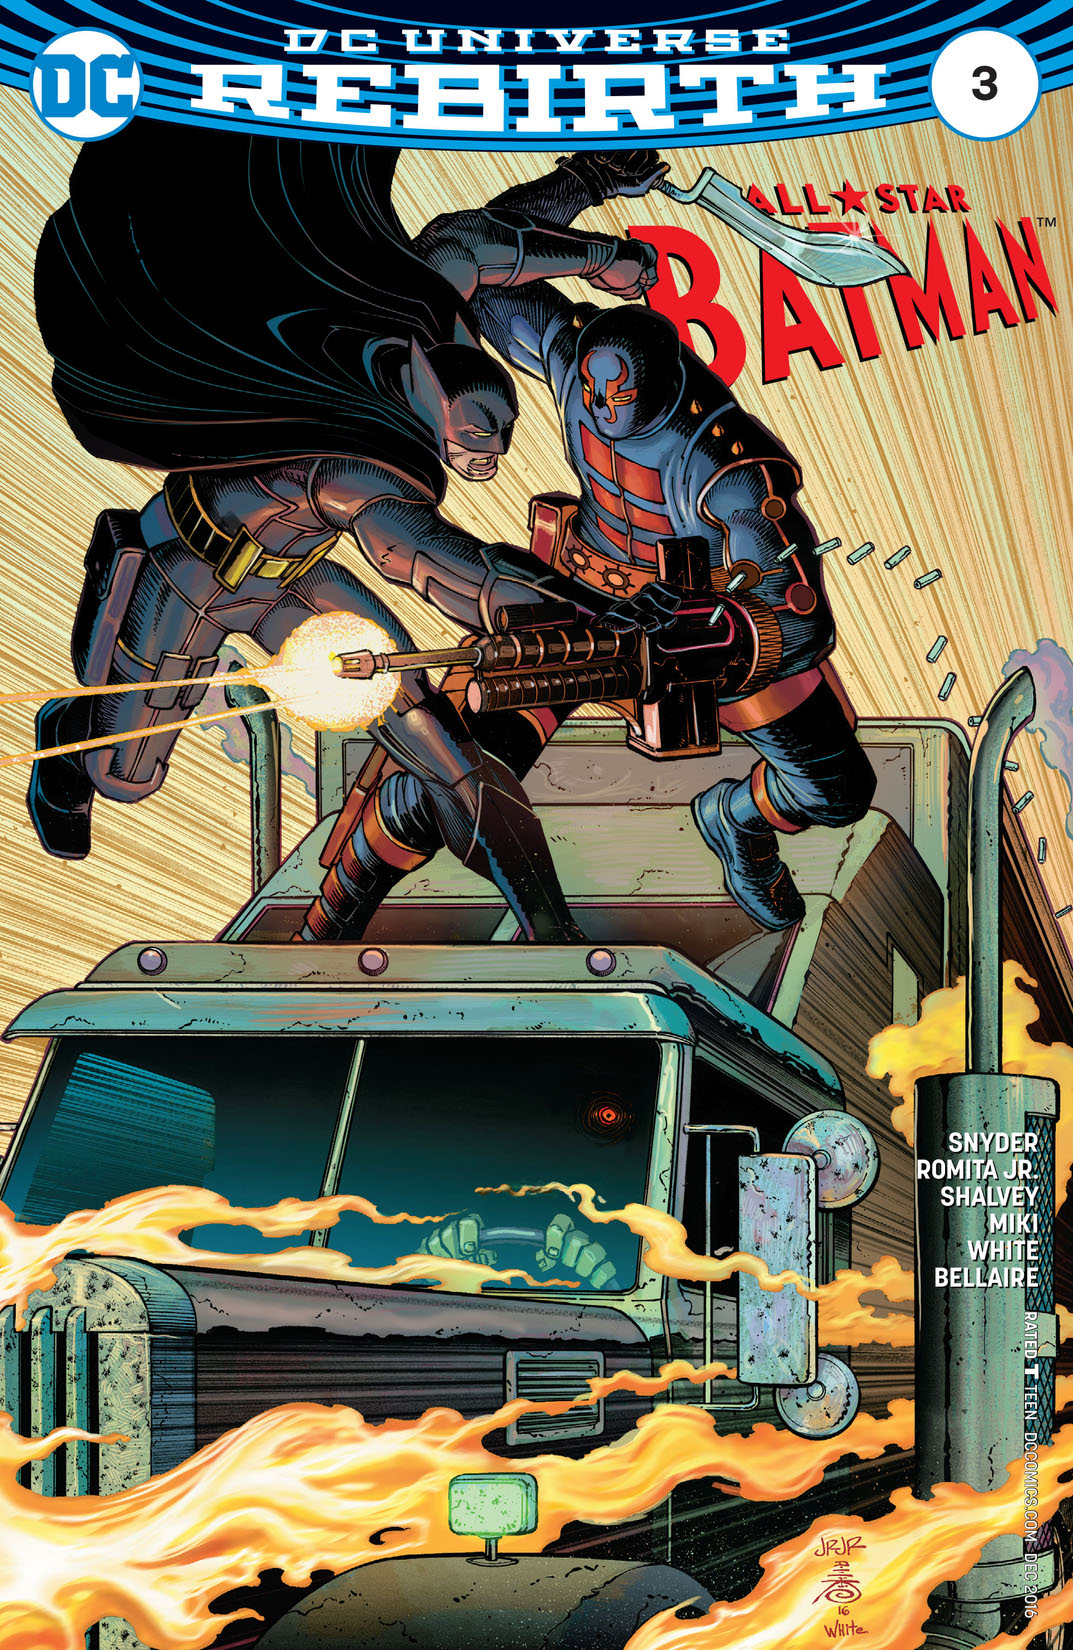 All Star Batman #3 preview images